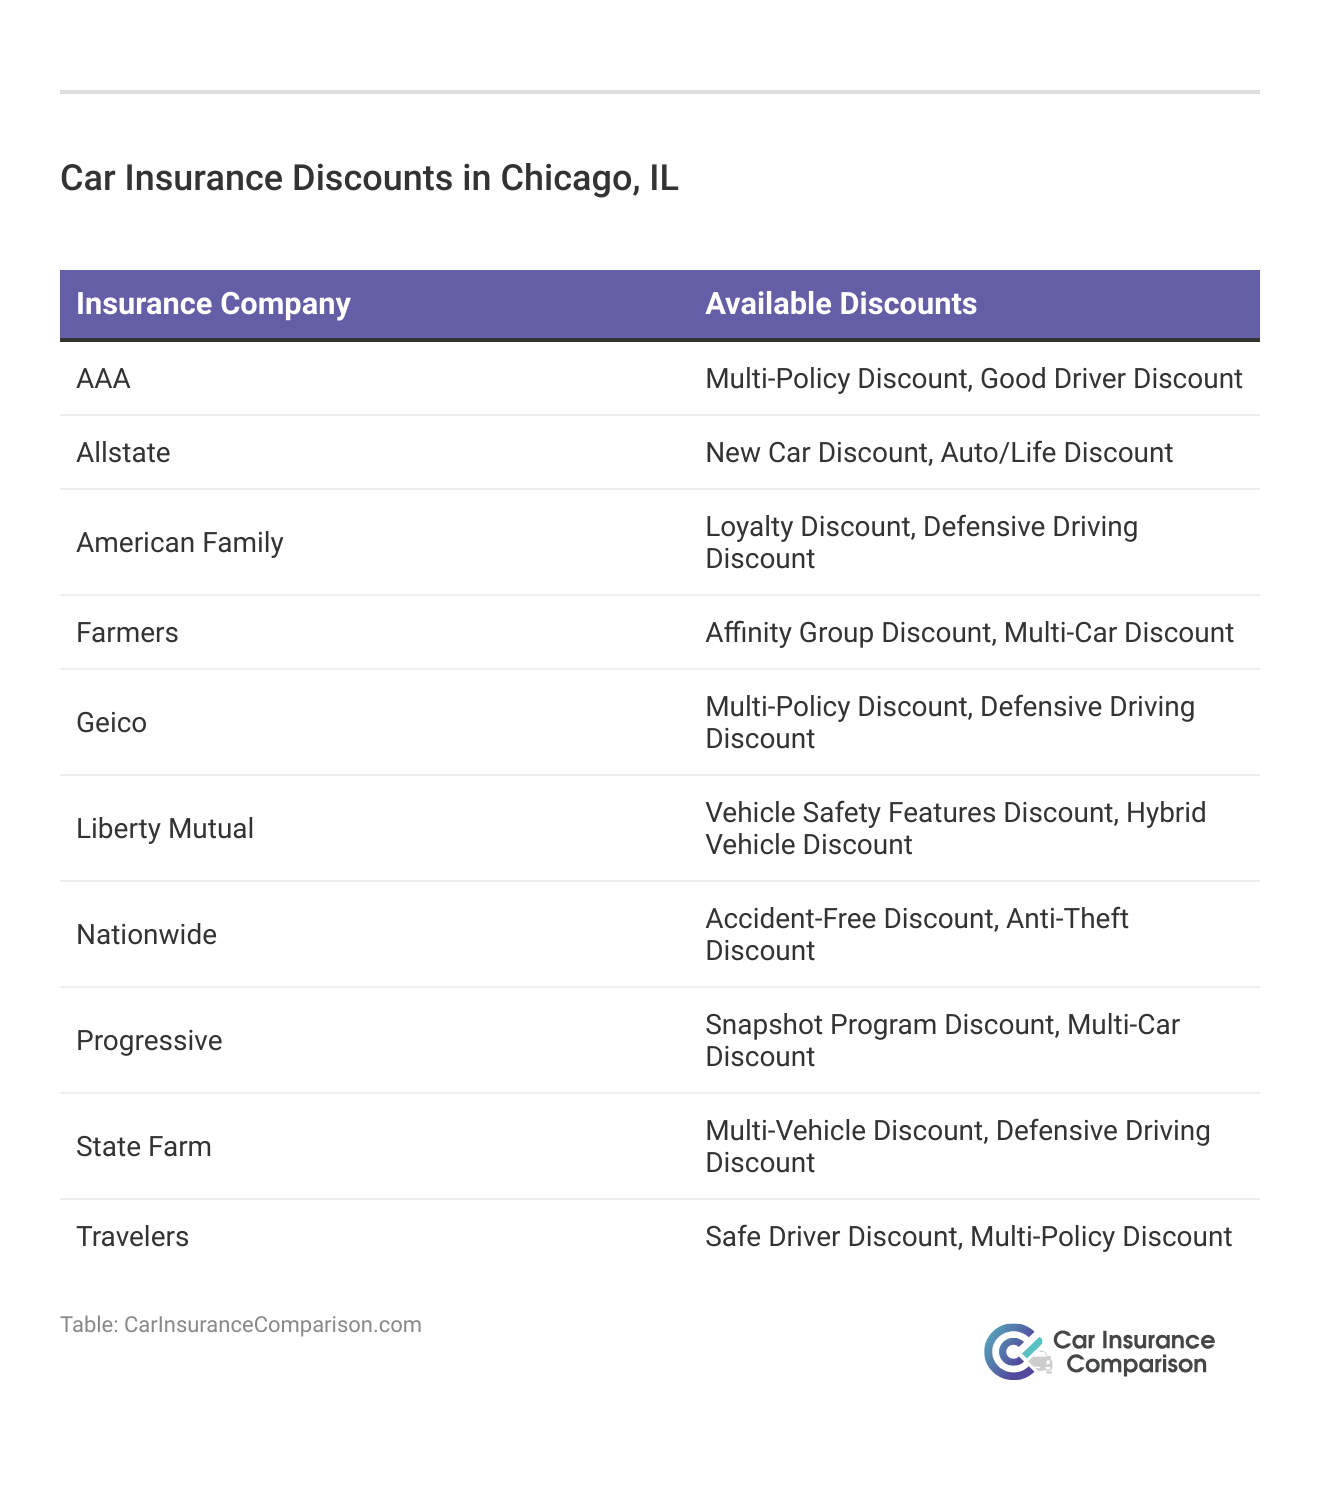 <h3>Car Insurance Discounts in Chicago, IL</h3>